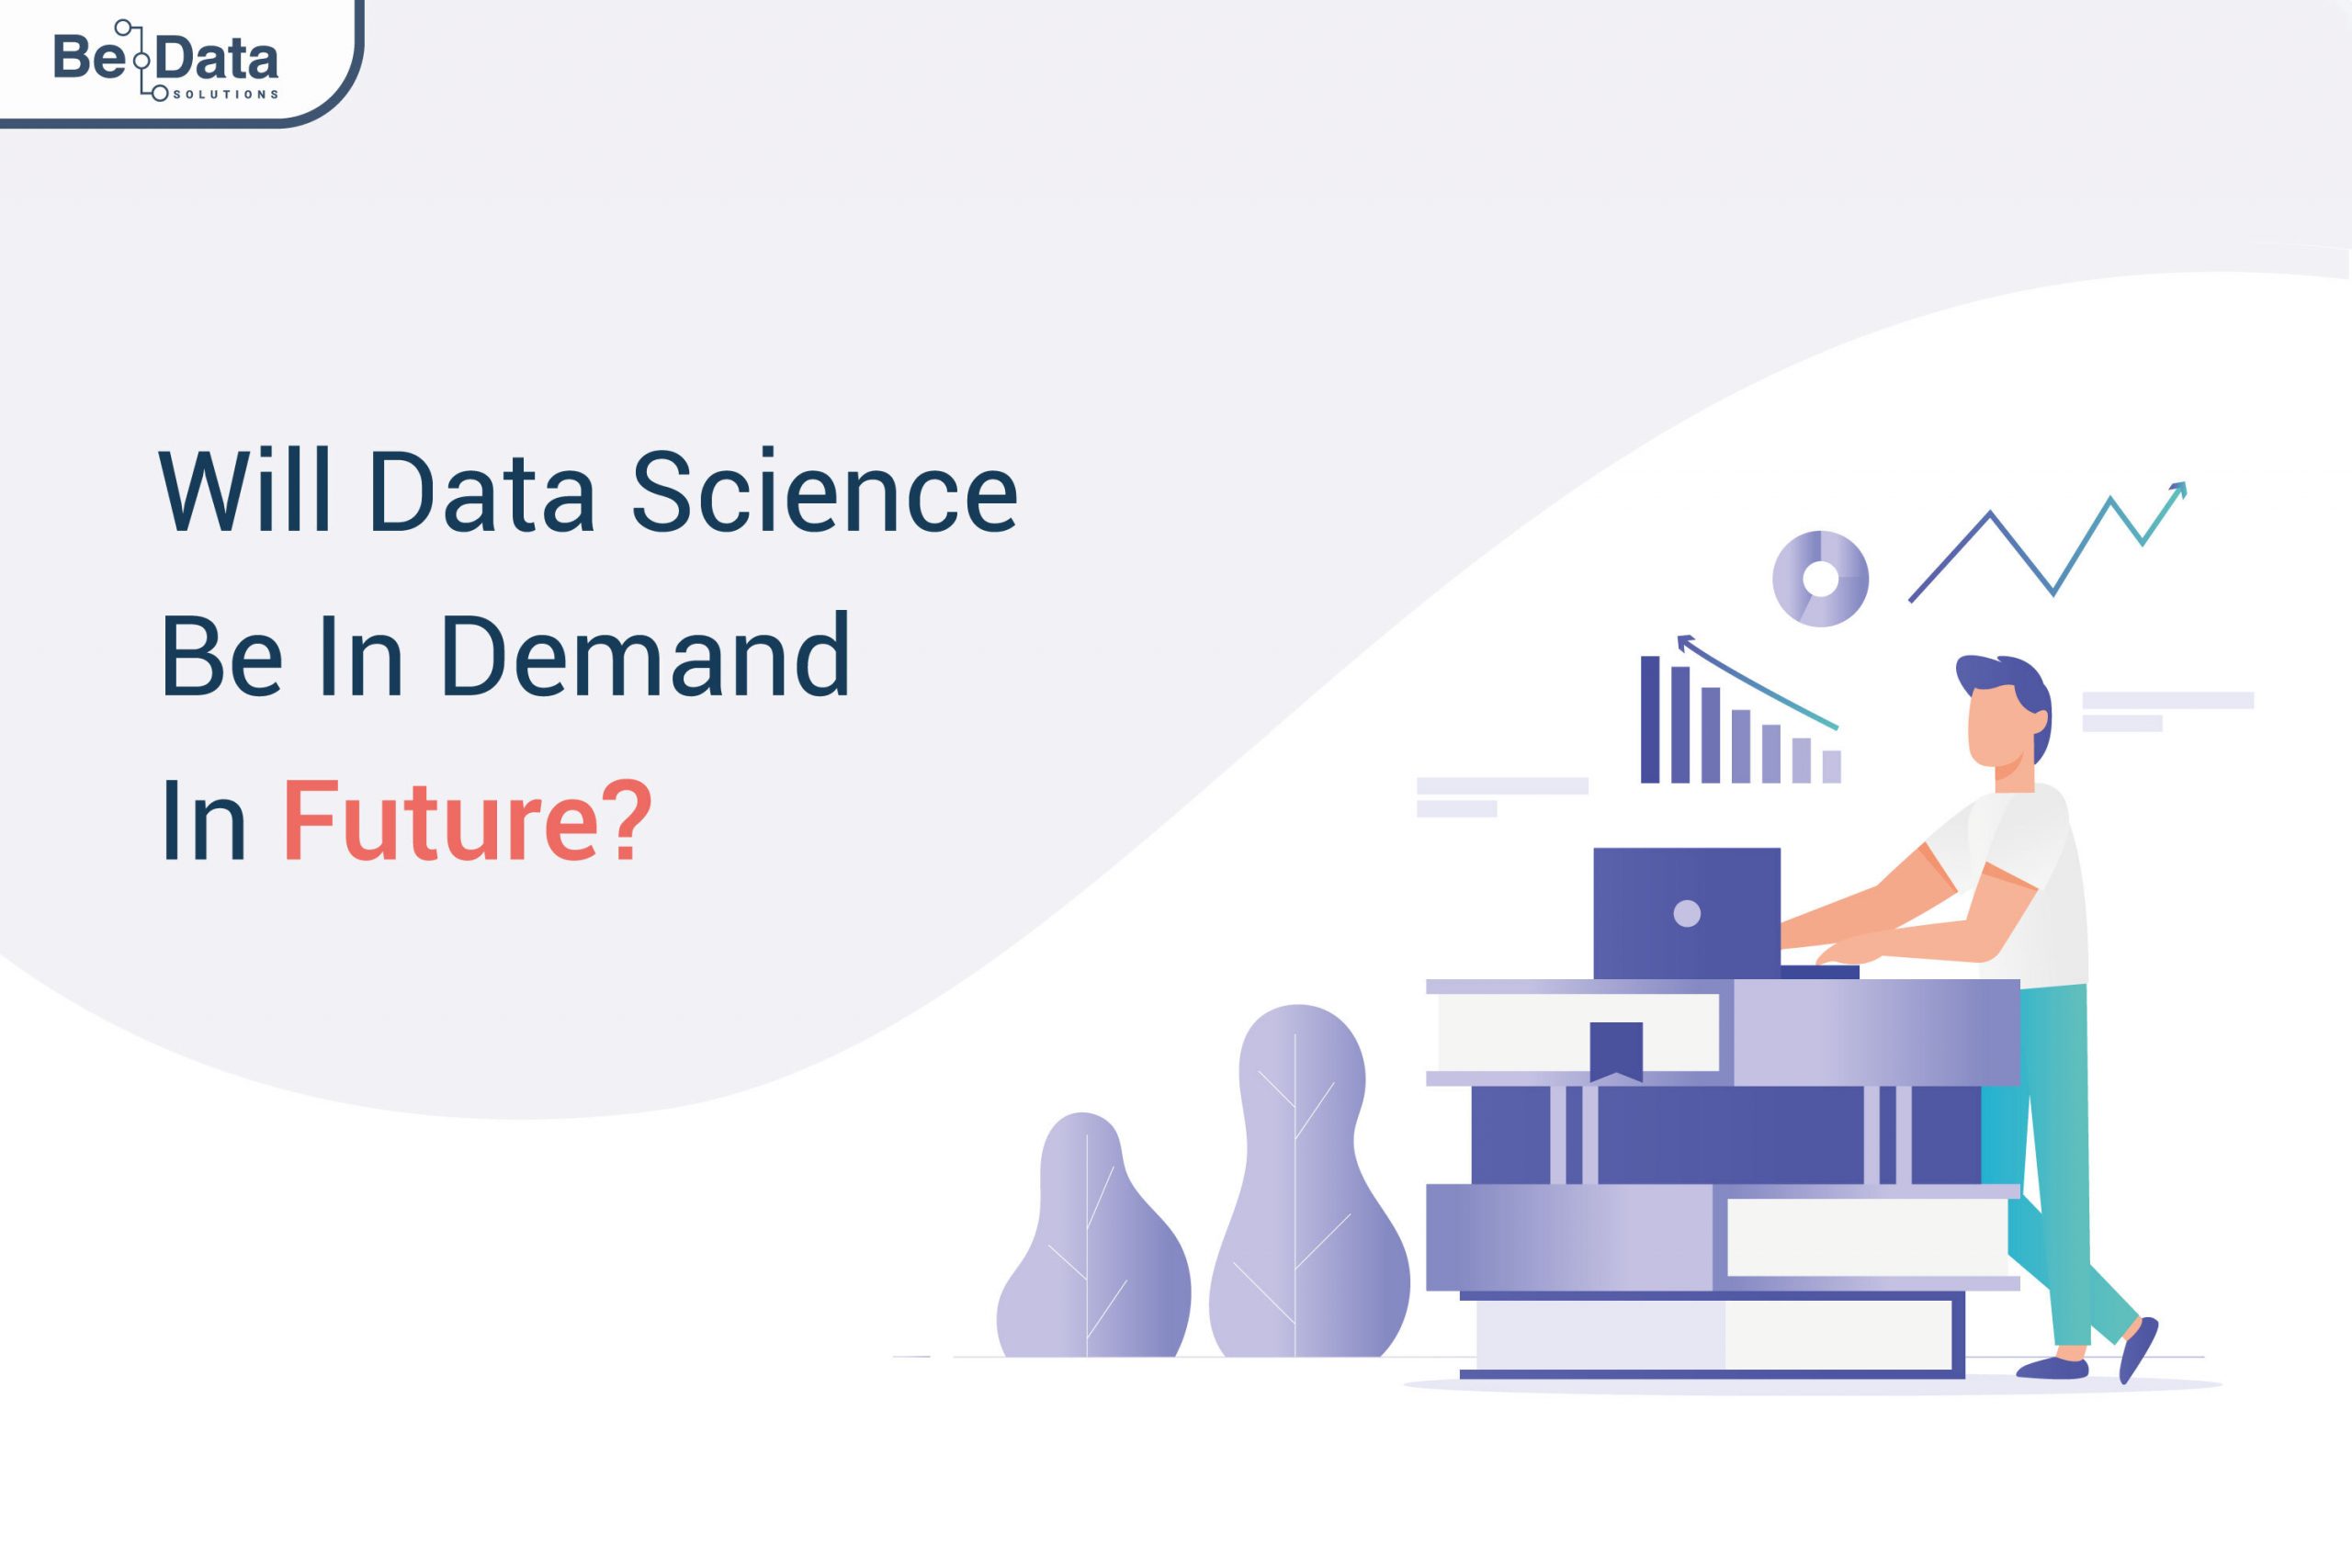 Will Data Science Be In Demand In Future?